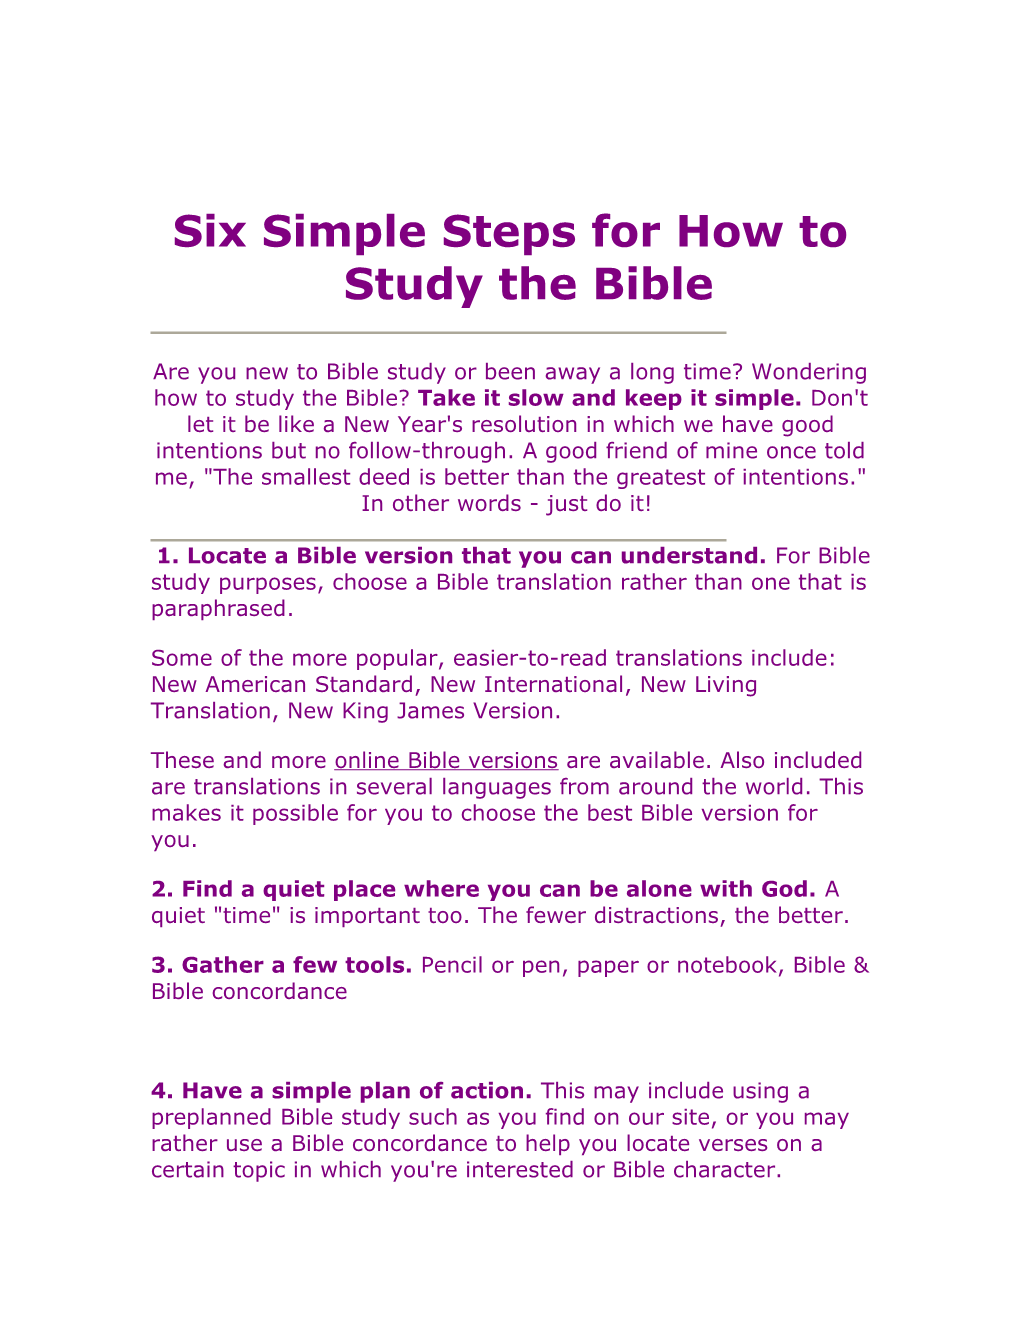 Six Simple Steps for How to Study the Bible